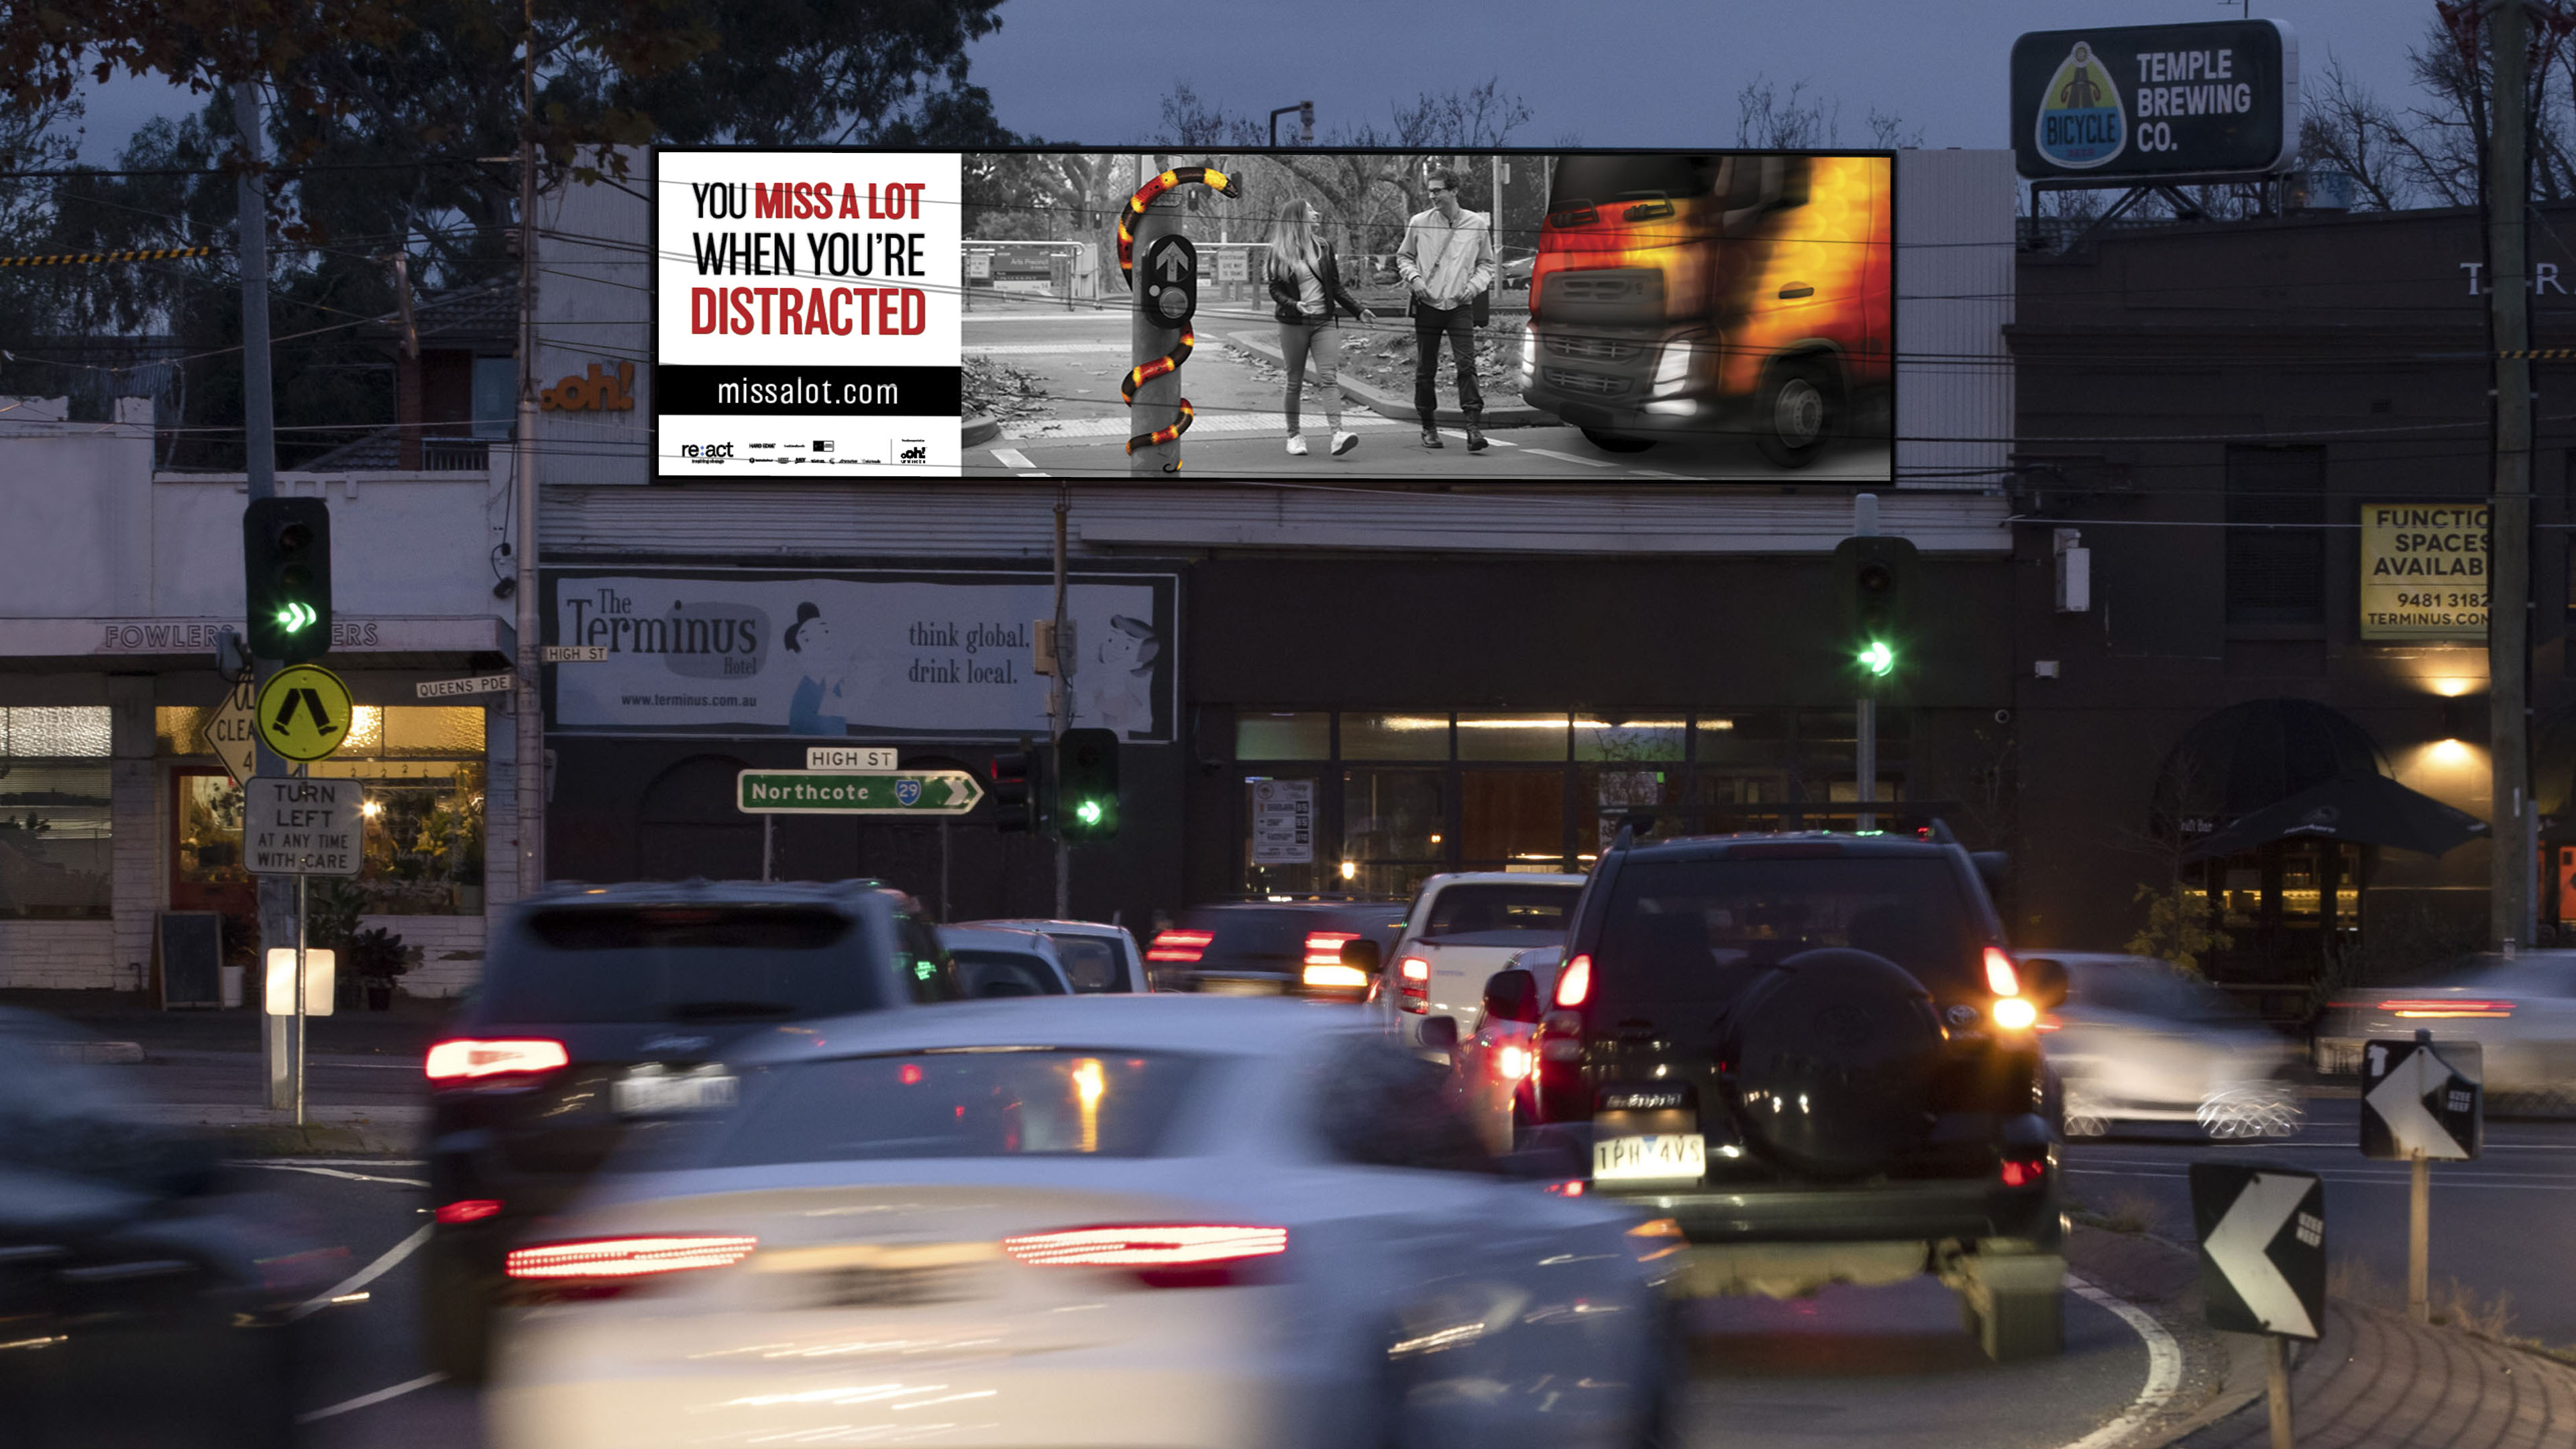 Re:act billboard advertising on road